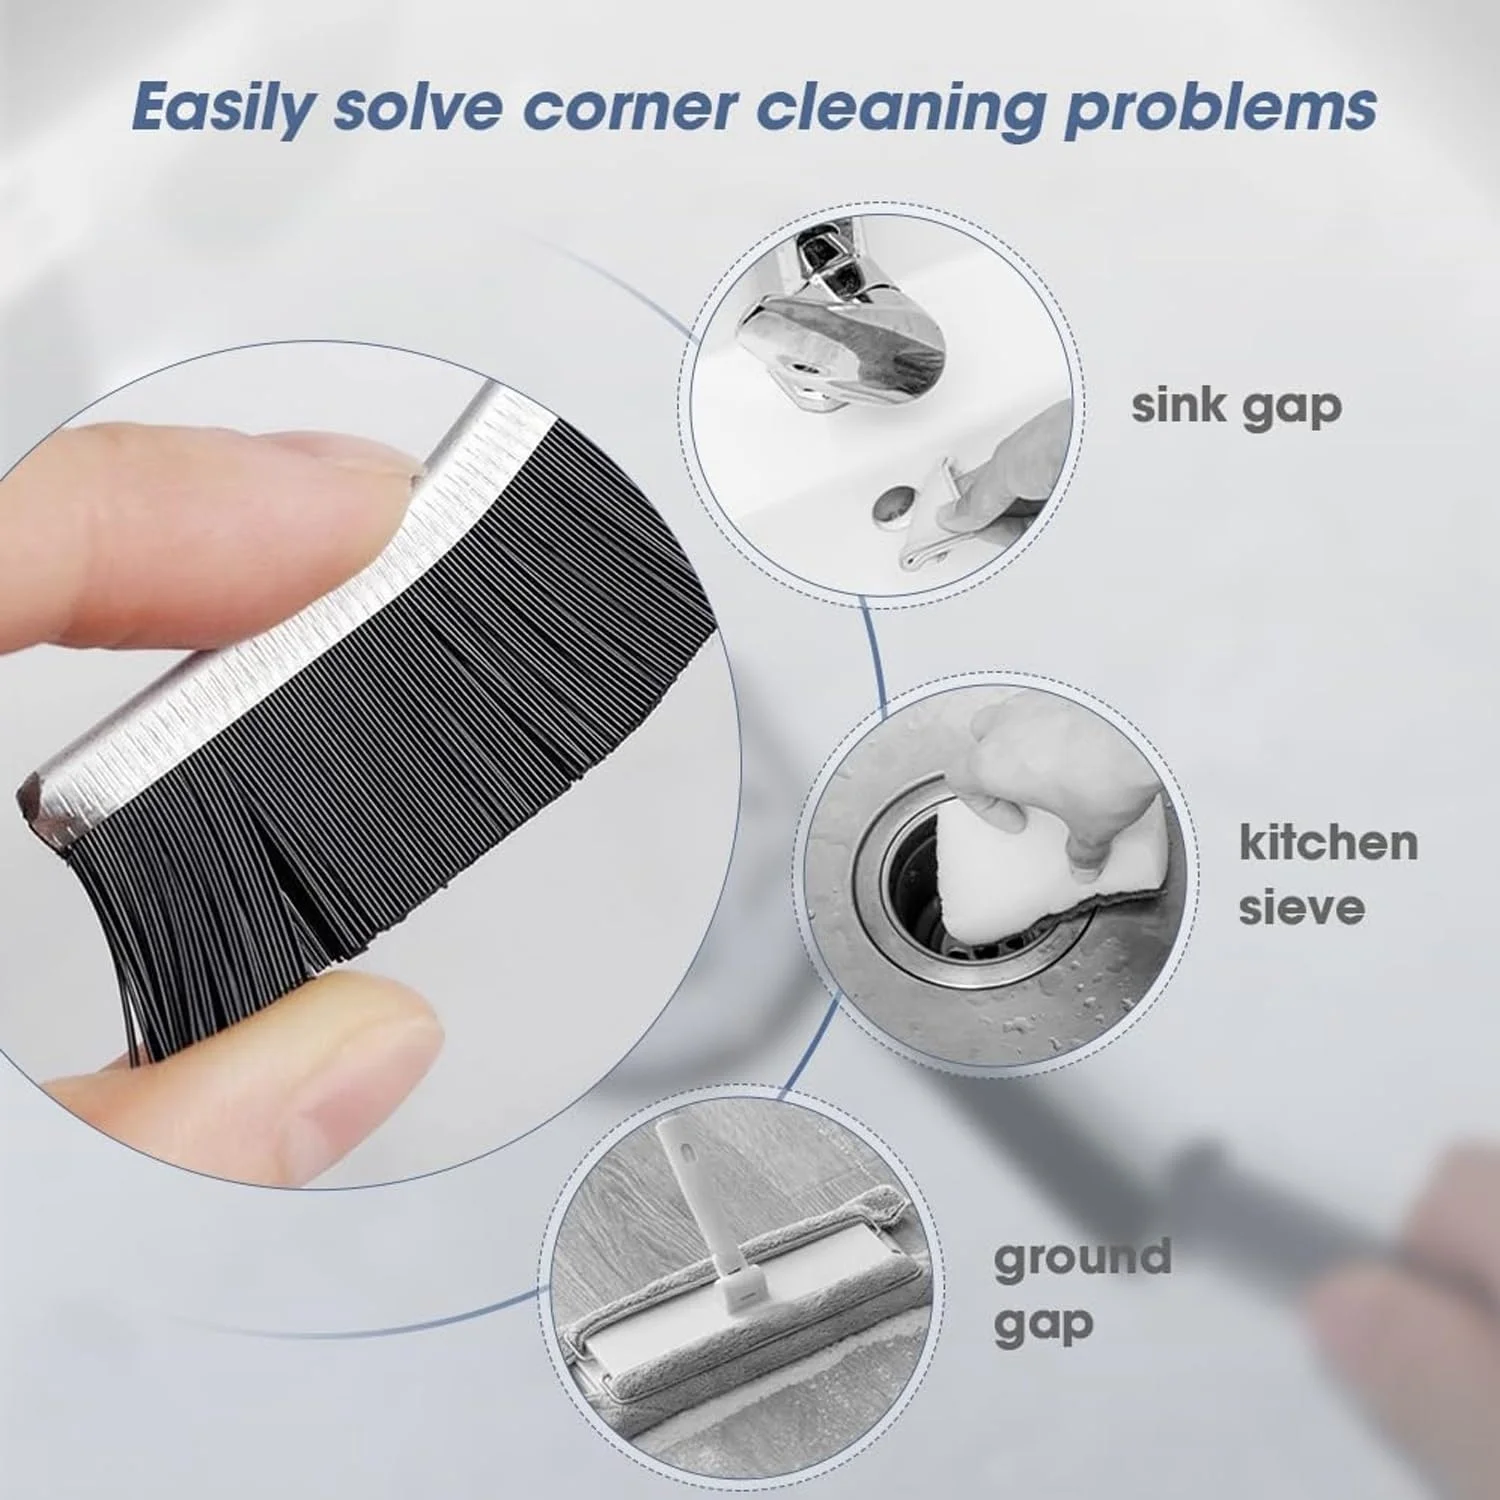 https://ae01.alicdn.com/kf/S3dddb1c939fb48d995ac45c19997ad9e9/Hard-Bristled-Crevice-Cleaning-Brush-Grout-Cleaner-Scrub-Brush-Deep-Tile-Joints-Crevice-Gap-Cleaning-Brush.jpg